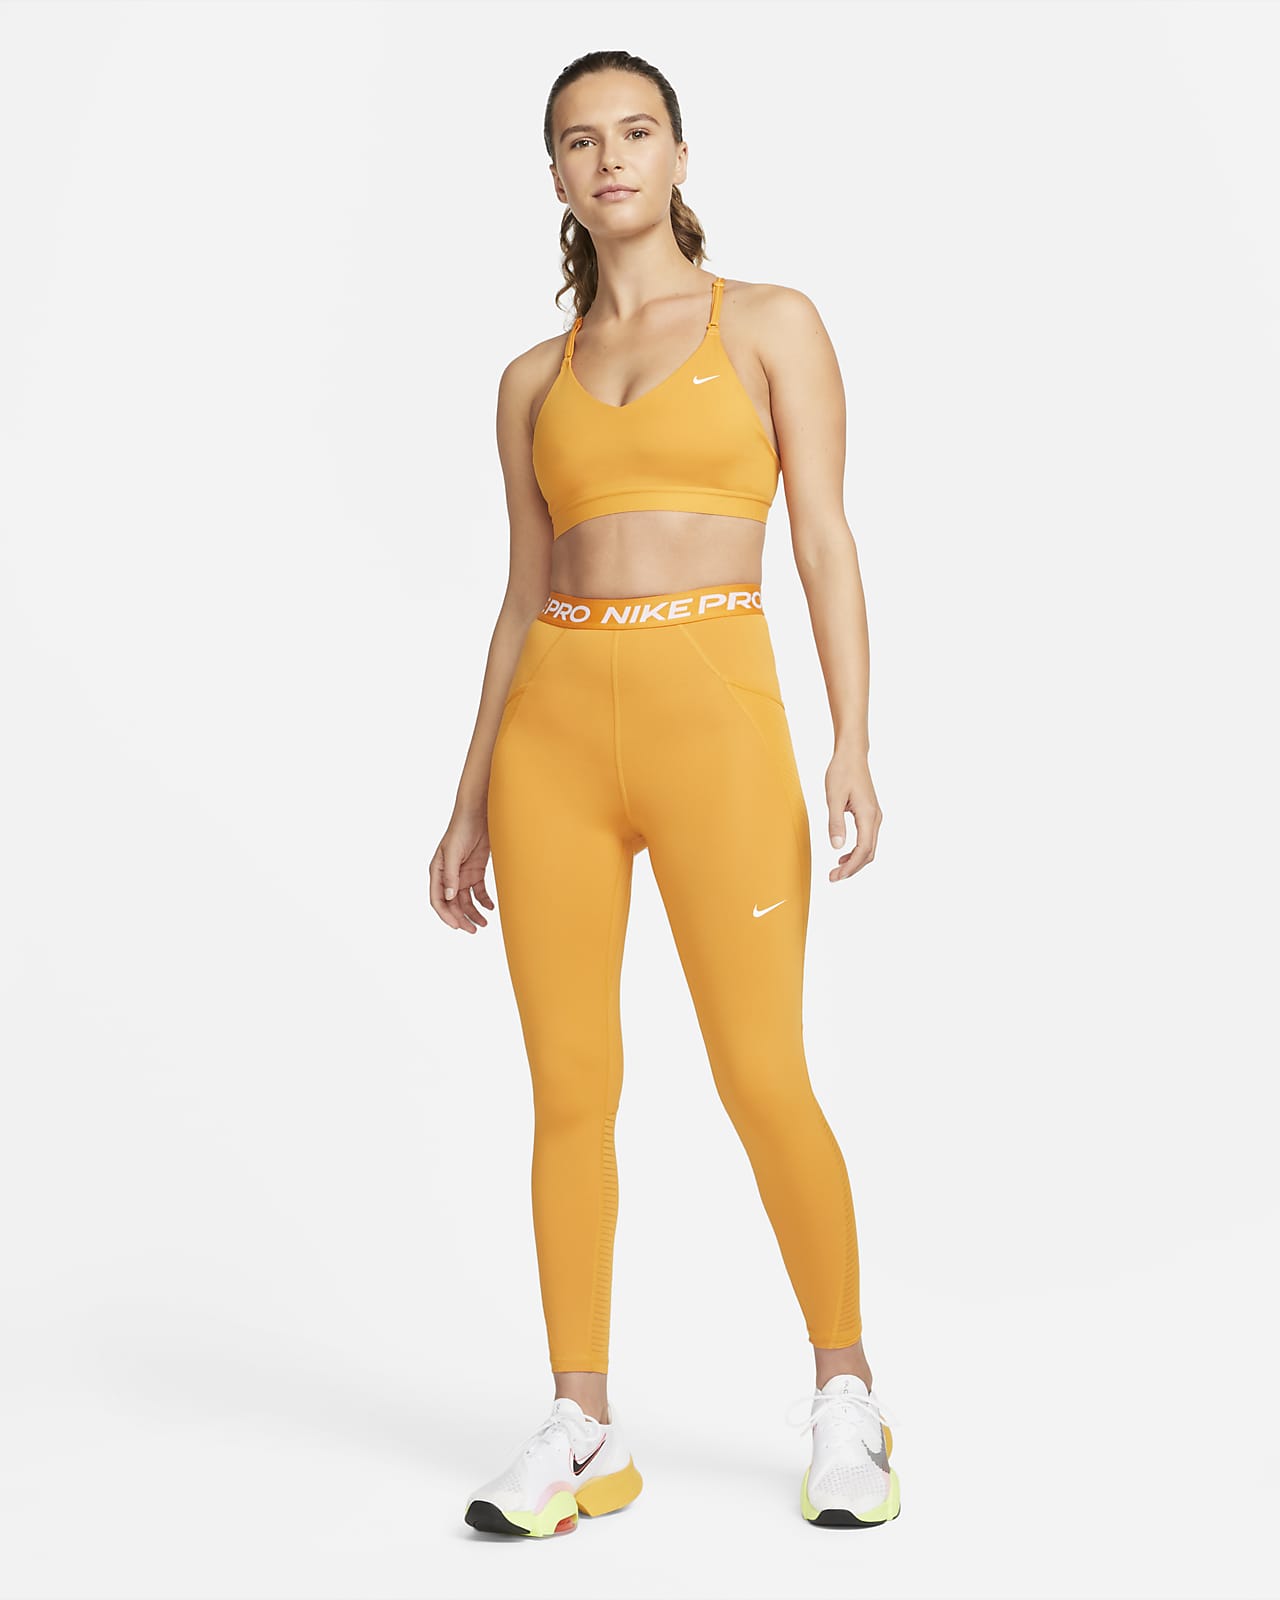 nike off white leggings and top